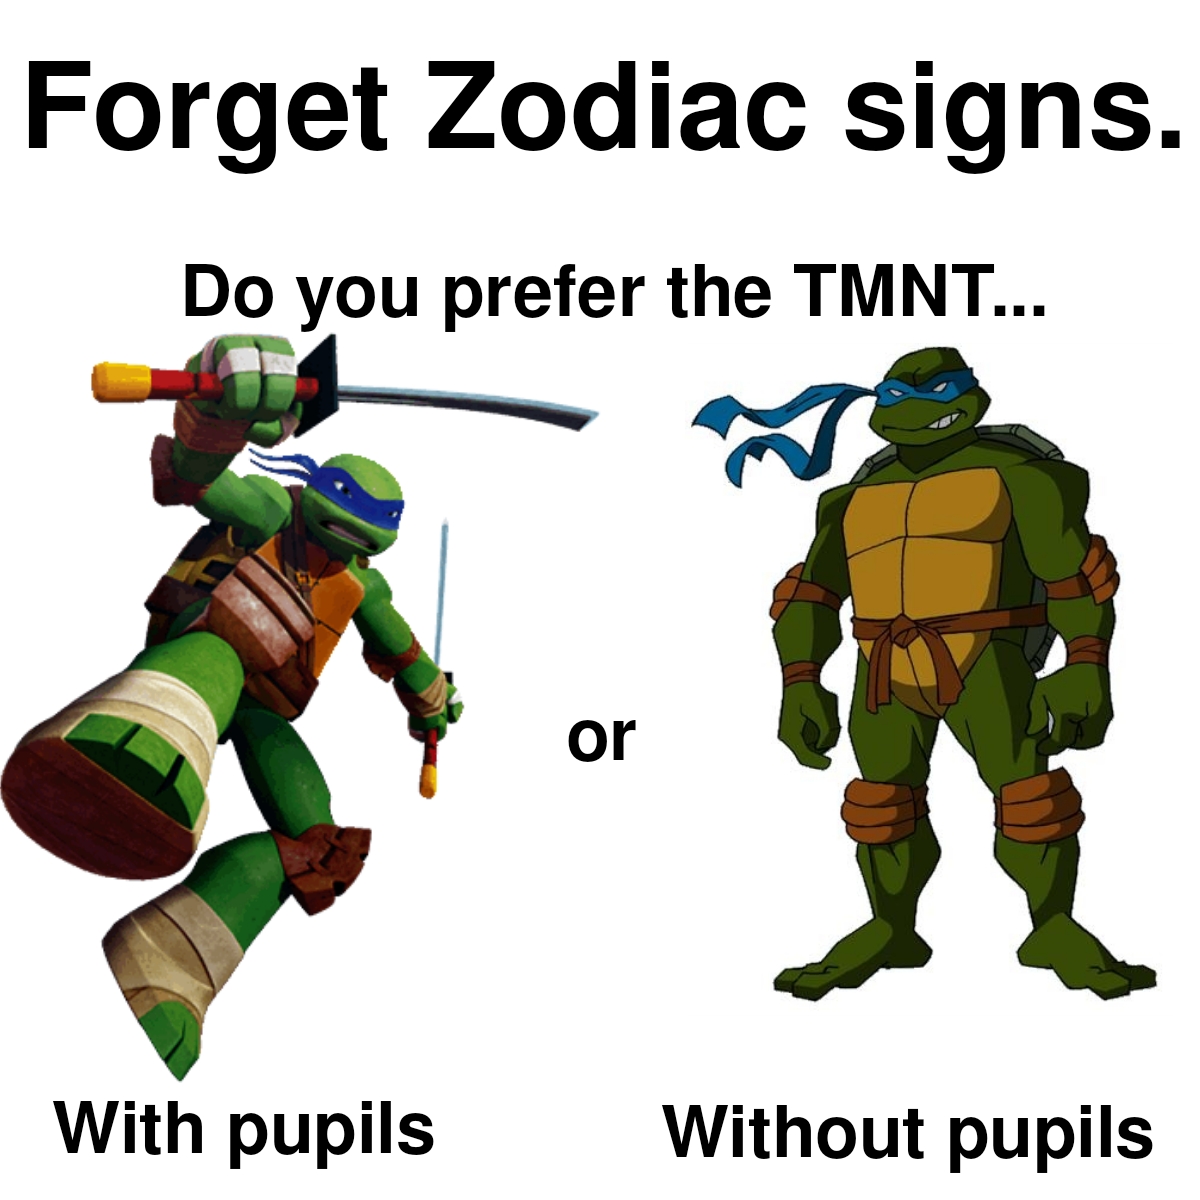 dank memes - tmnt 2003 leonardo - Forget Zodiac signs. Do you prefer the Tmnt... or With pupils Without pupils